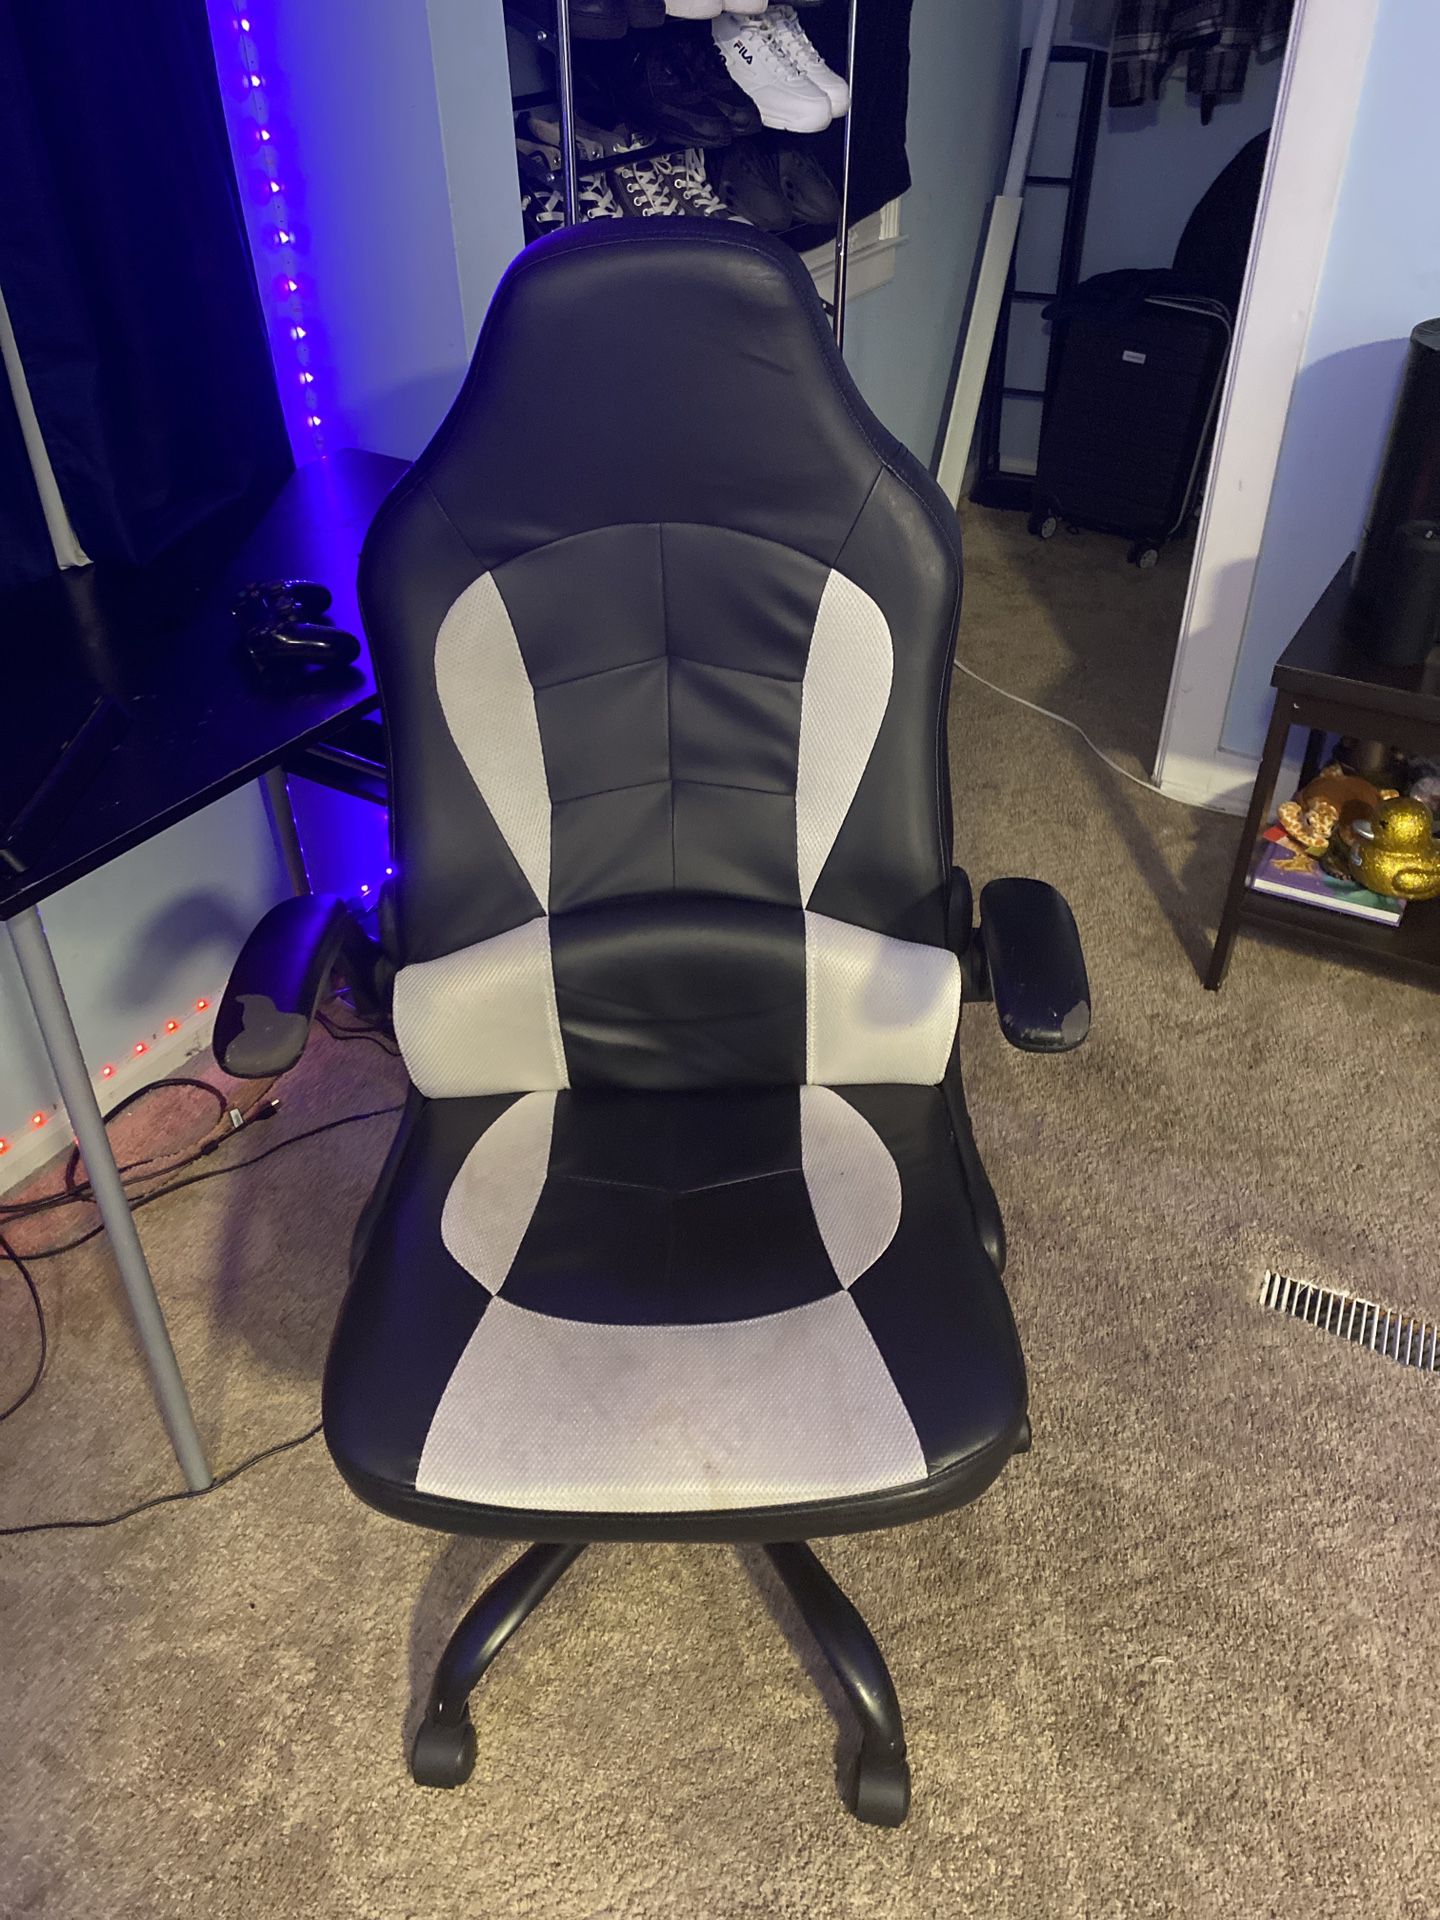 Gaming/Office Chair Black & White 